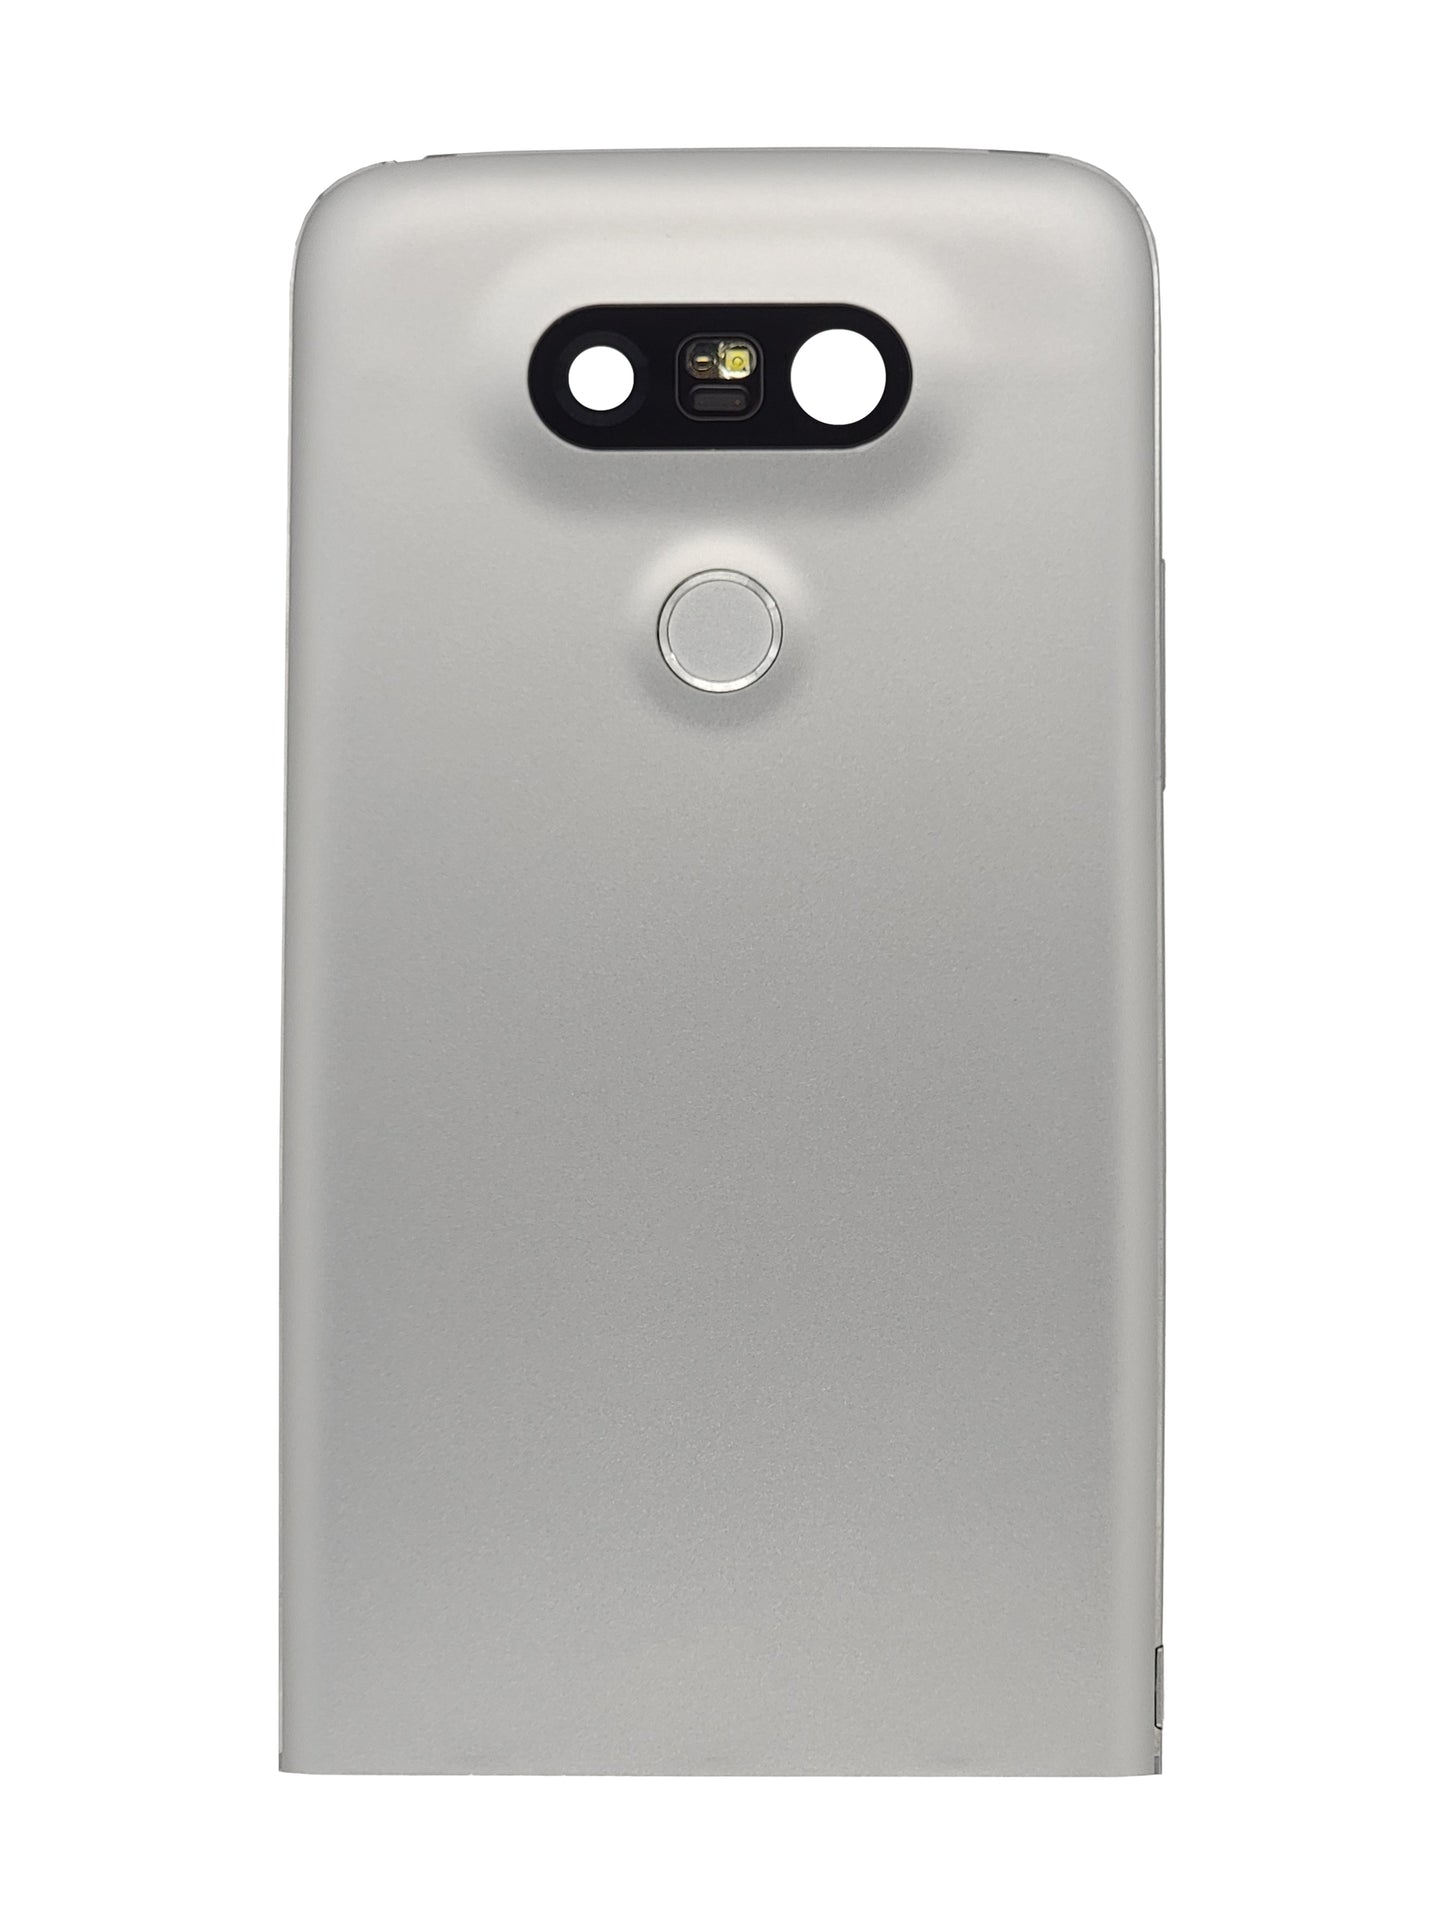 LGG G5 Back Cover (Silver)